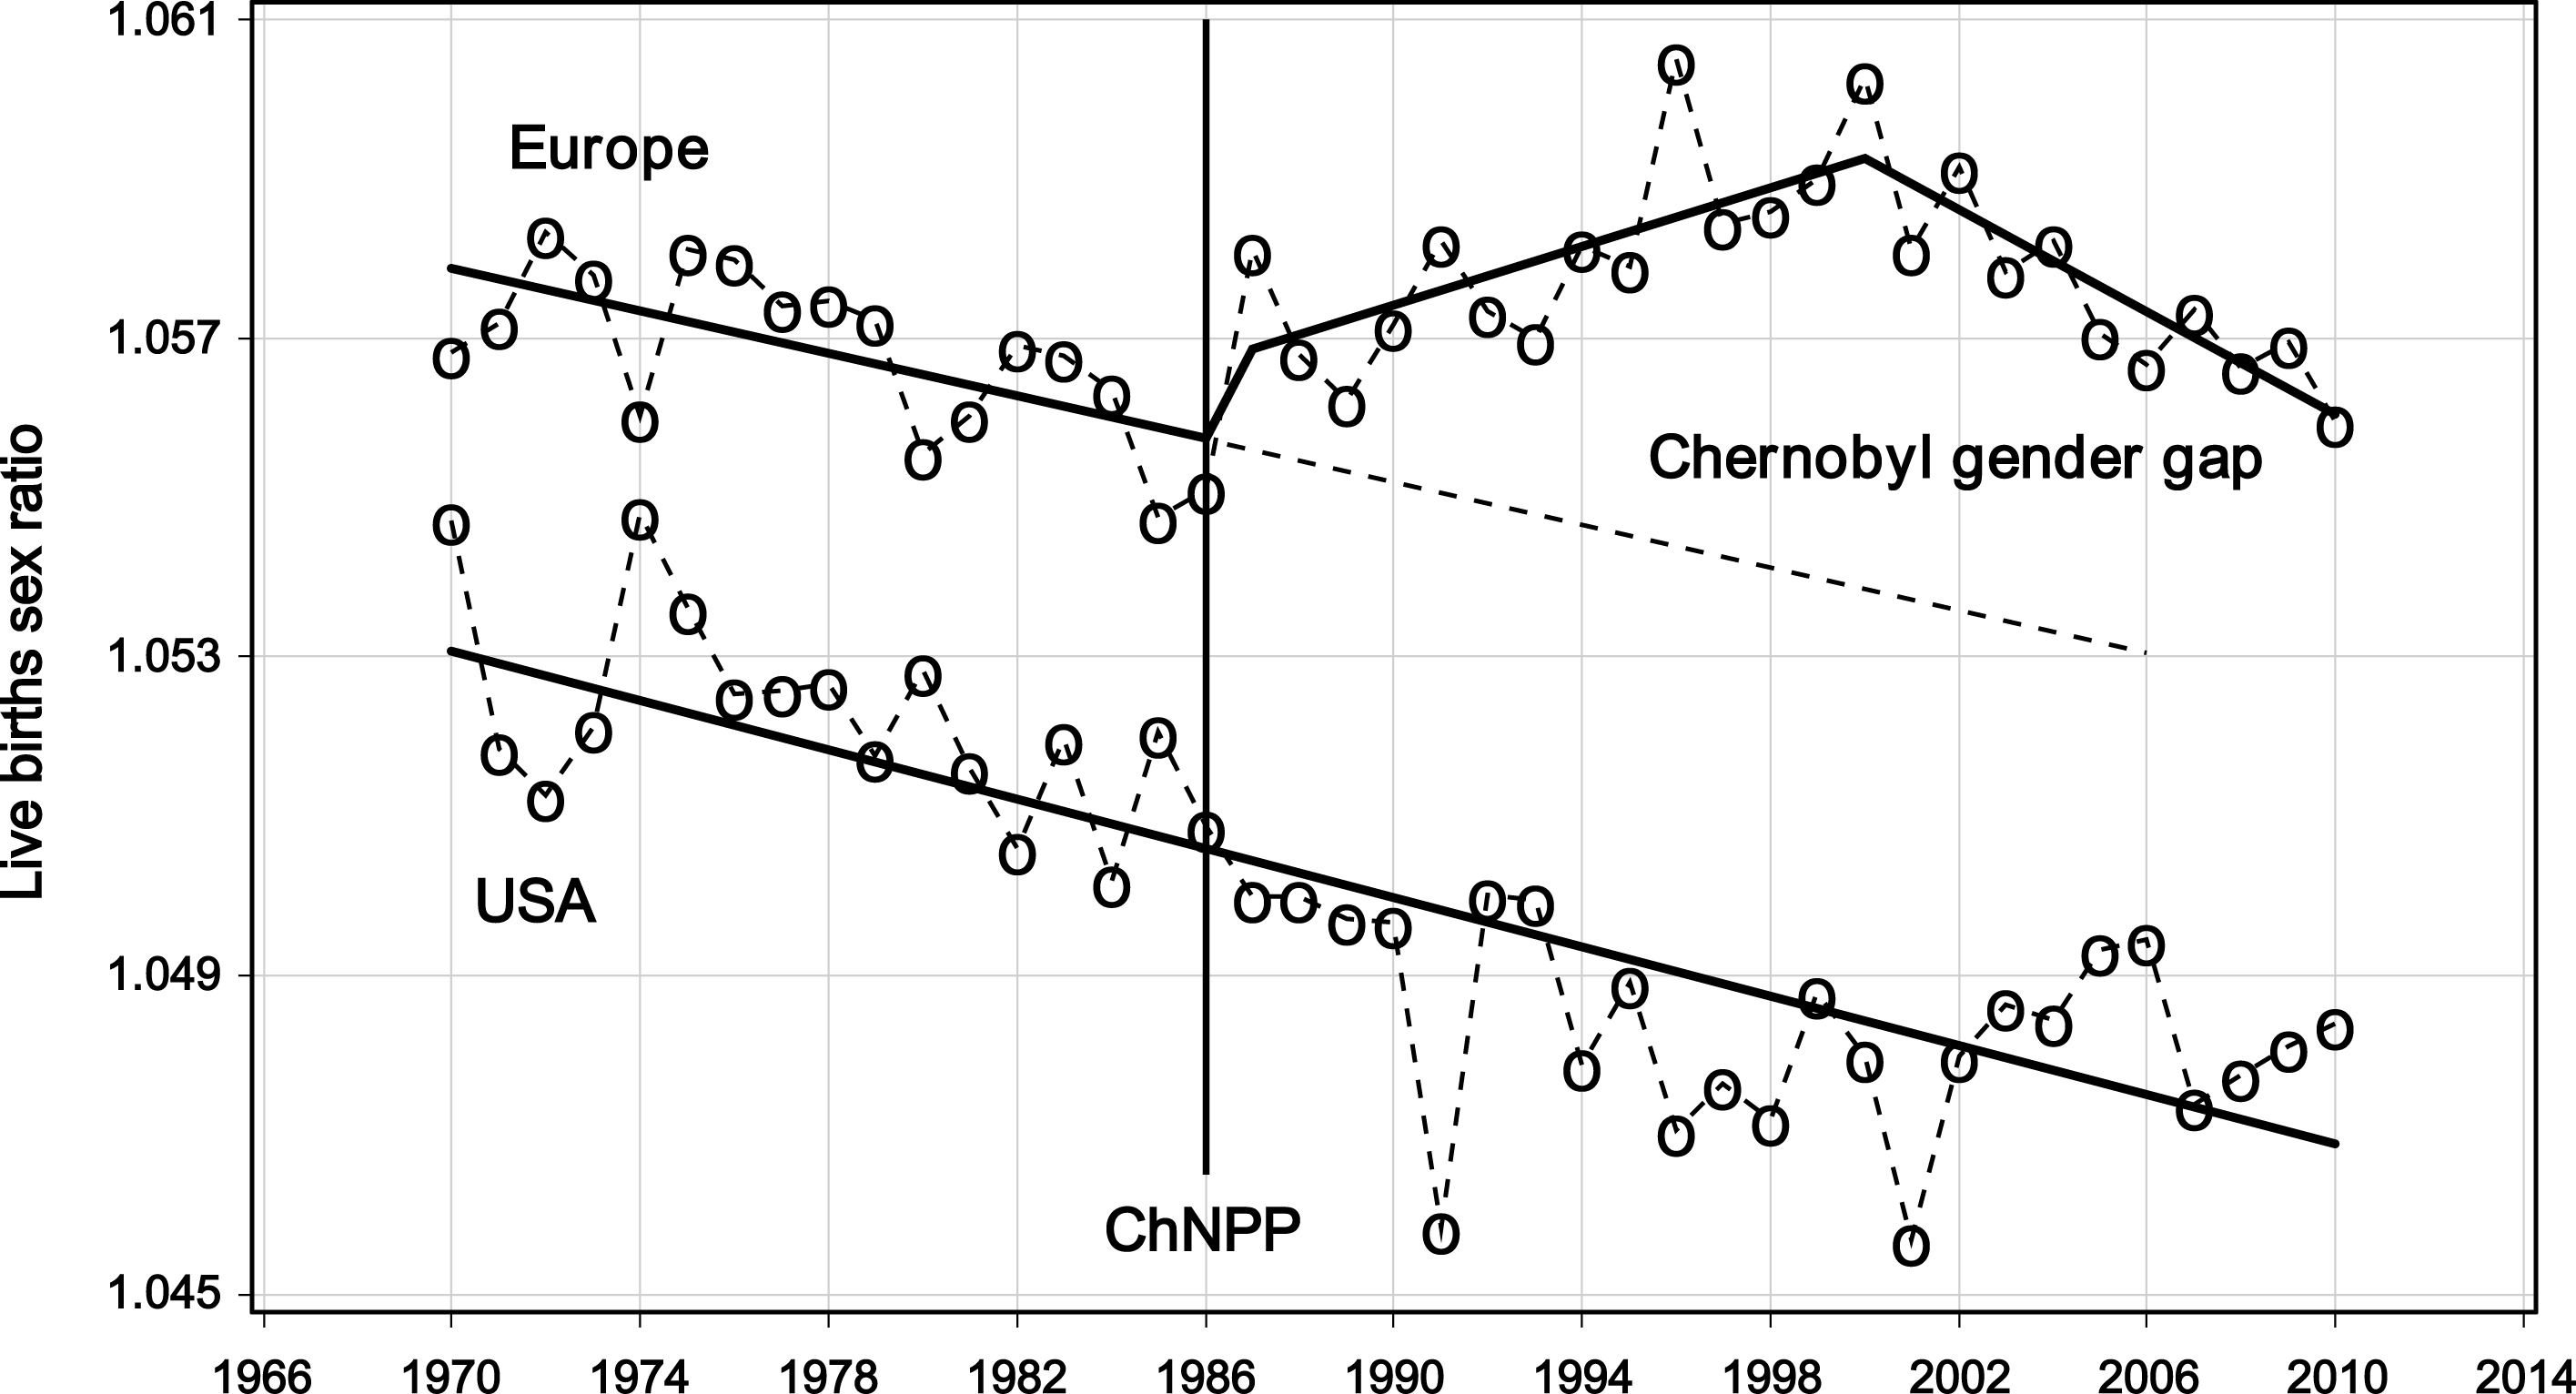 Secular trends of the live births sex ratio (male/female) in Europe and in the USA, 1970–2010, before and after the Chernobyl nuclear power plant accident (ChNPP).